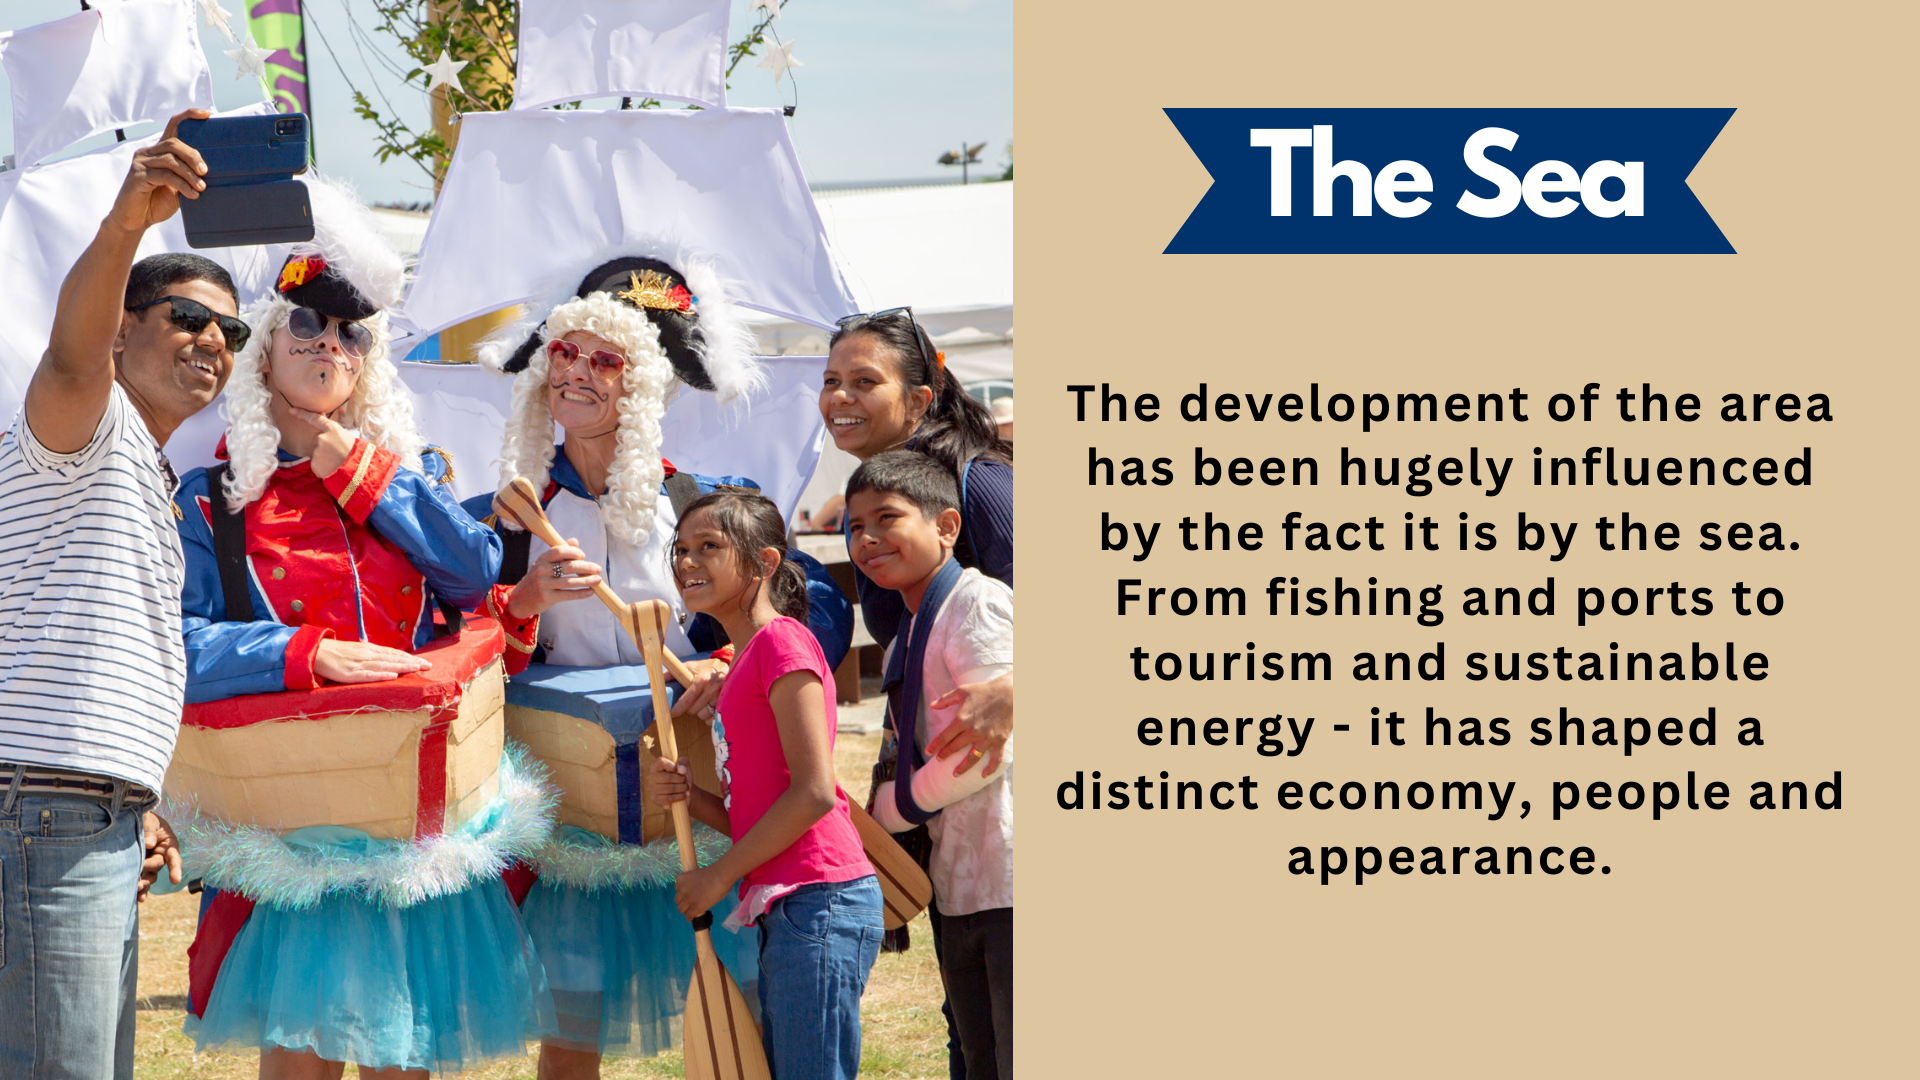 The Sea. The development of the area has been hugely influenced by the fact it is by the sea. From fishing and ports to tourism and sustainable energy - it has shaped a distinct economy, people and appearance.